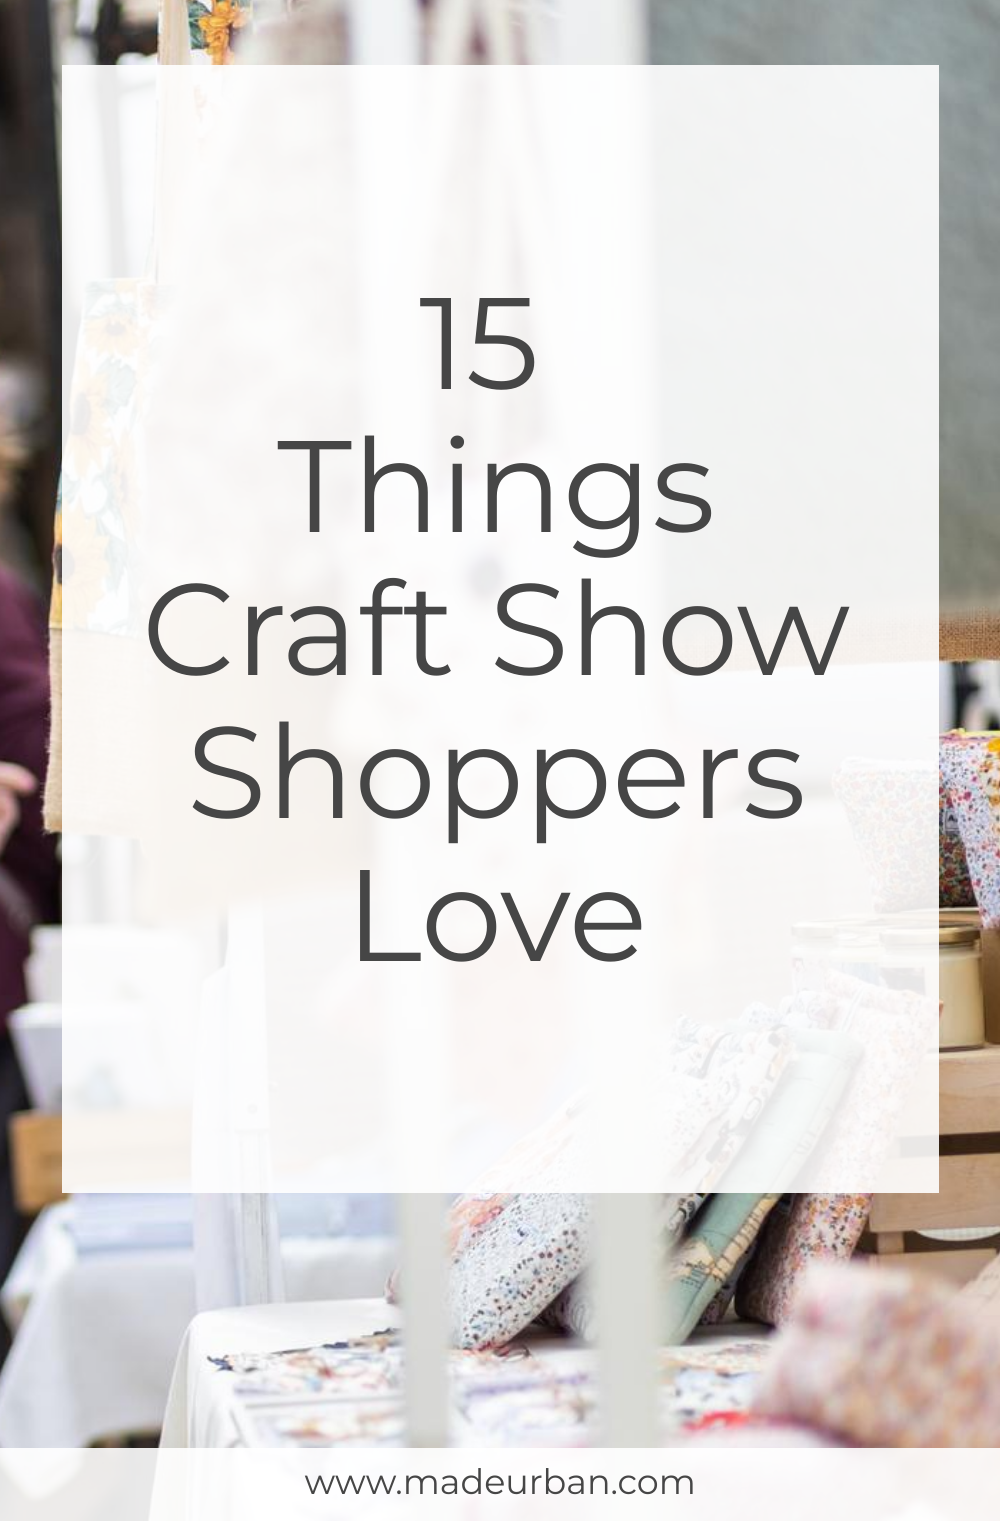 15 Things Craft Show Shoppers Love